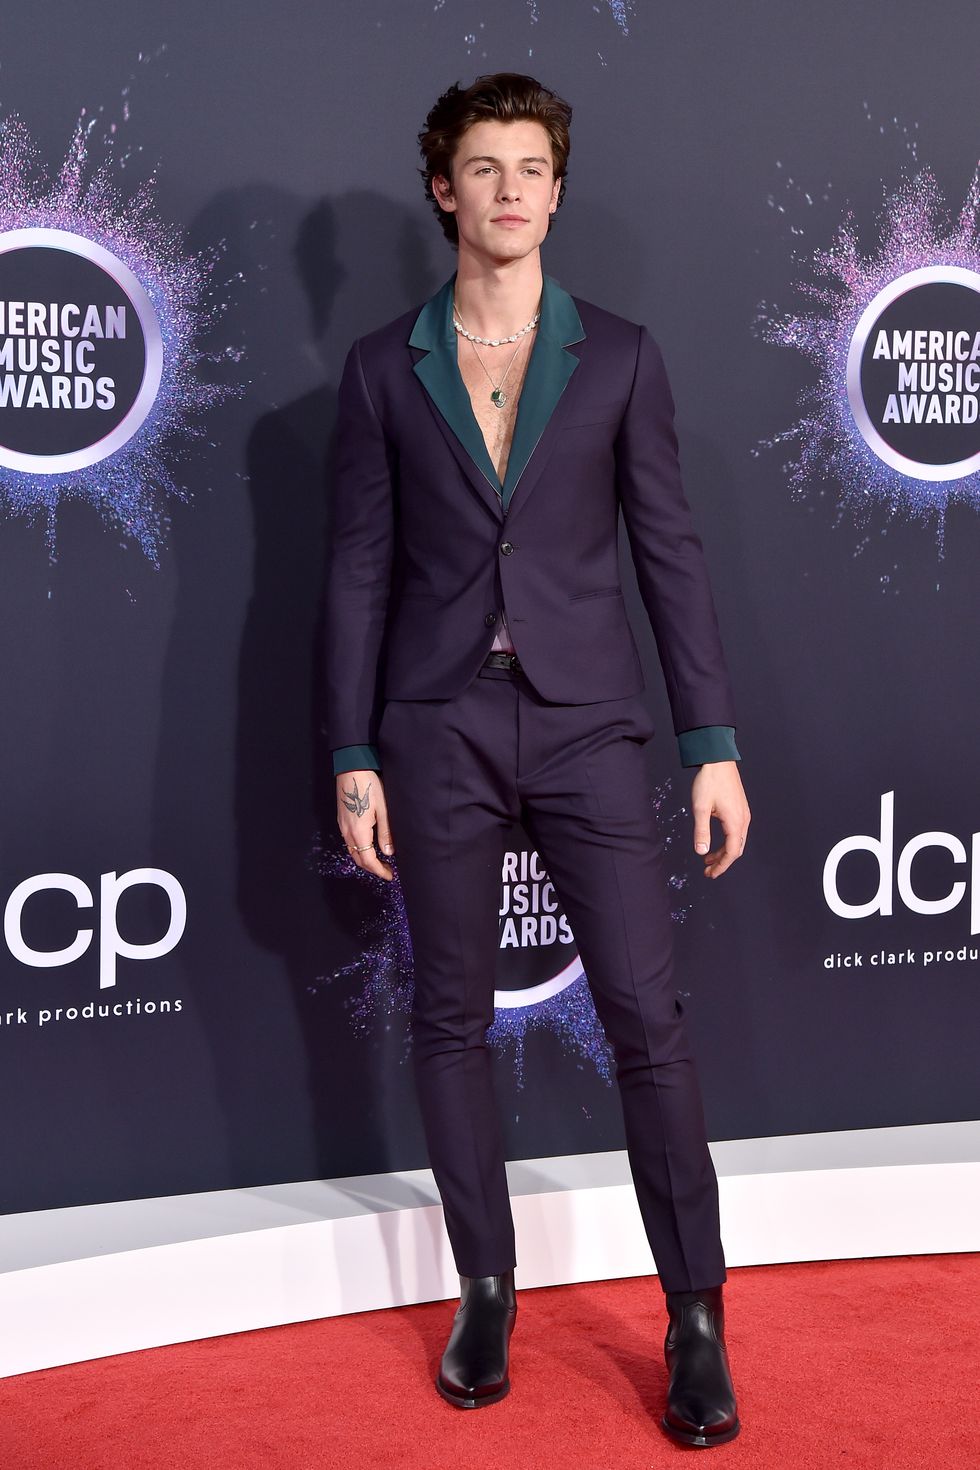 Shawn Mendes at the 2019 American Music Awards - Arrivals